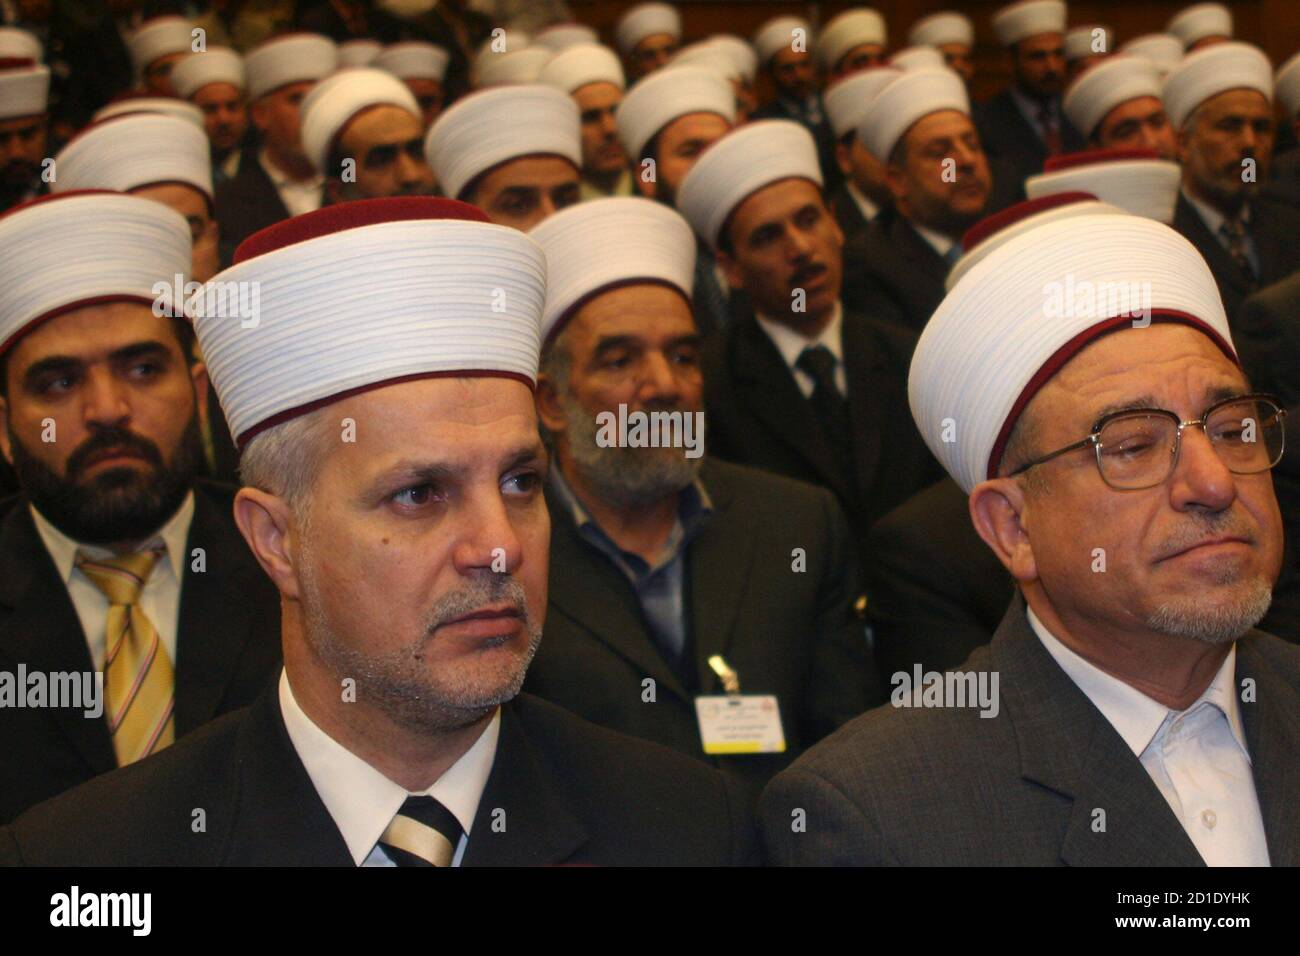 Muslim Sharia judges attend the first Arab conference on Islamic law held in Amman September 3, 2007. The scholars clerics from across the region debated the of Muslim